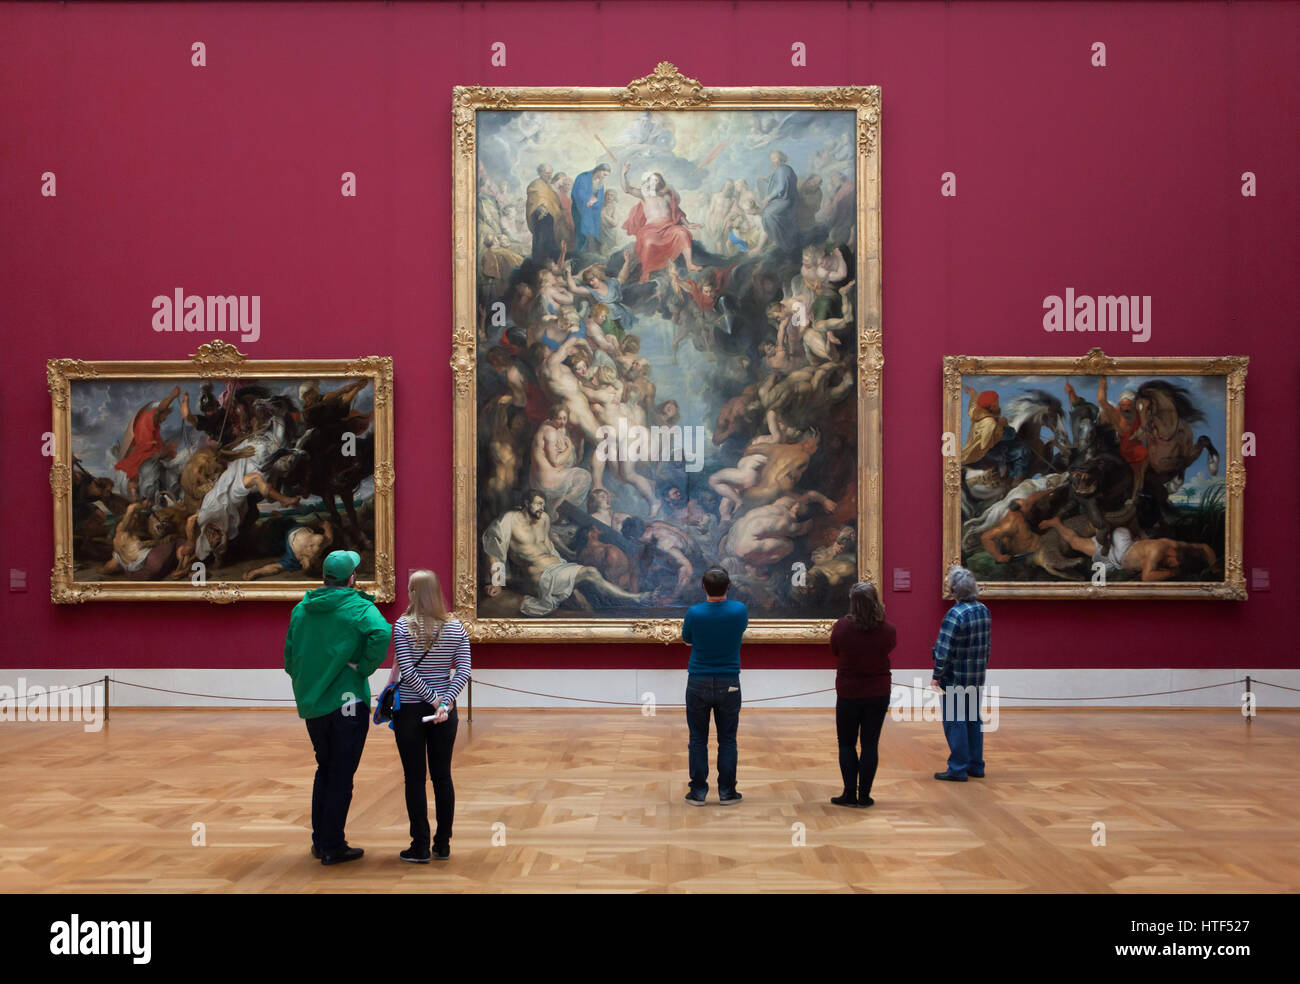 Visitors in front of the paintings by Flemish painter Peter Paul Rubens displayed in the Alte Pinakothek (Old Pinacotheca) in Munich, Bavaria, Germany. Paintings Lion Hunt (1621), The Great Last Judgement (1617) and The Hippopotamus and Crocodile Hunt (1616) by Peter Paul Rubens are depicted from left to right. Stock Photo